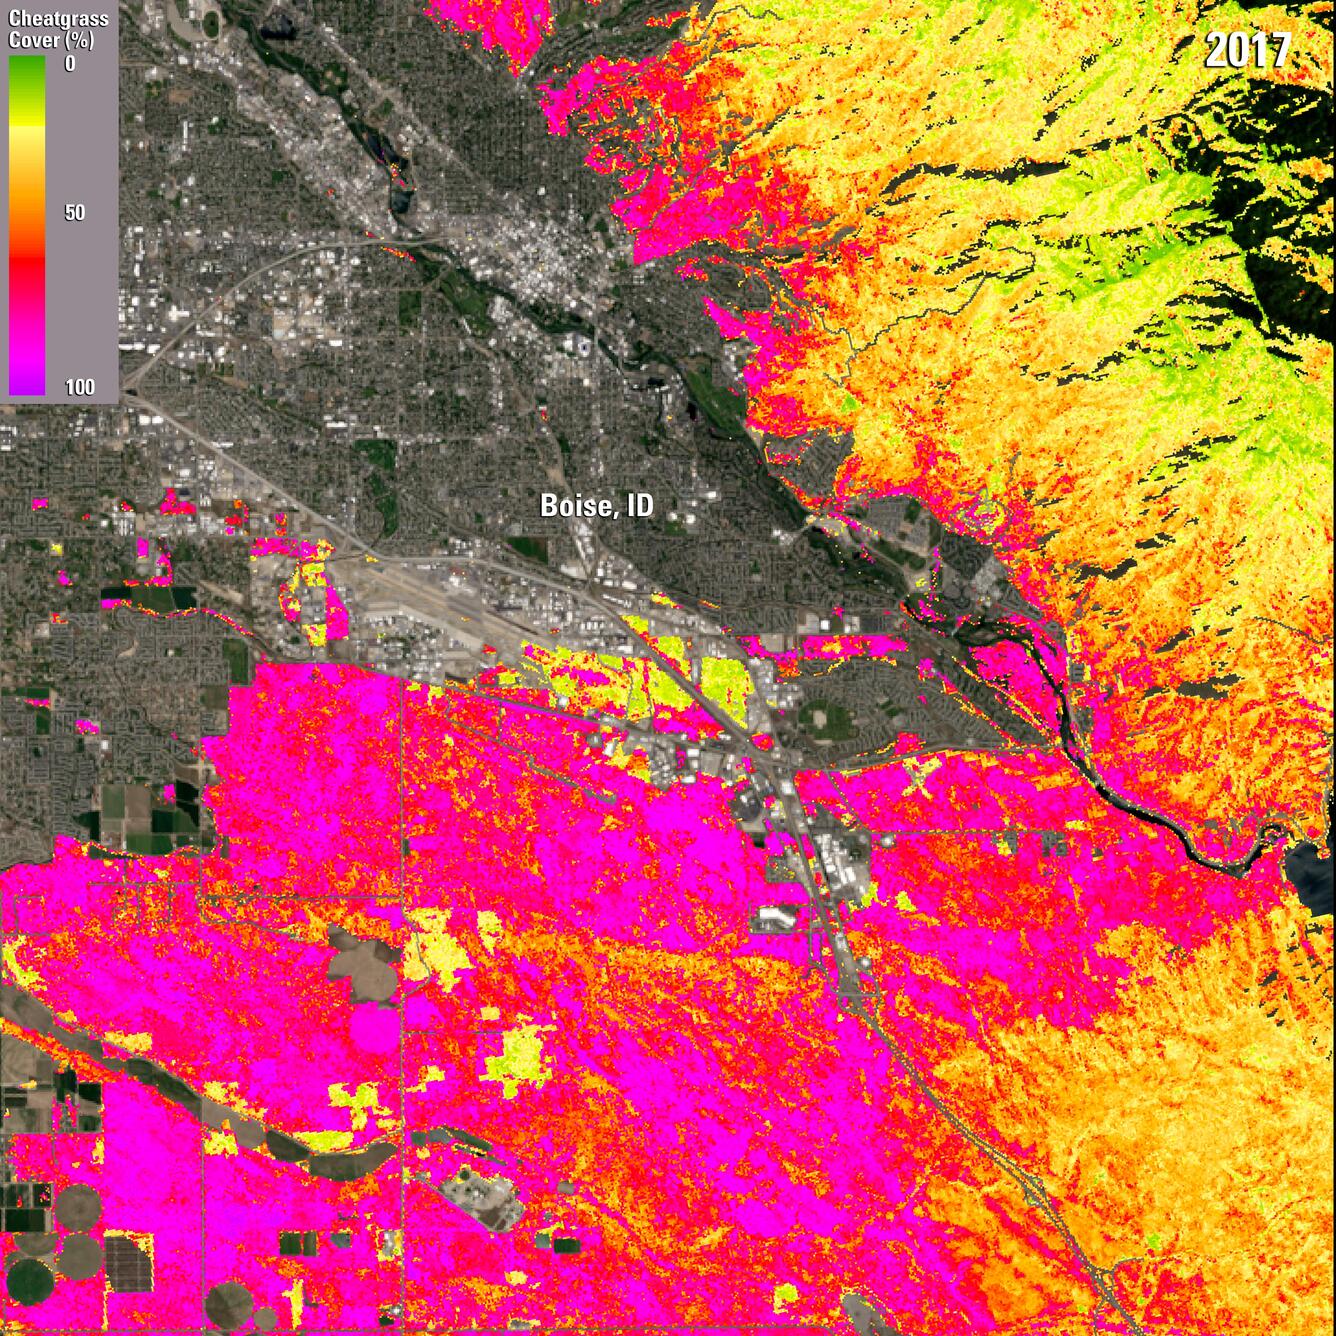 Color image of Boise, ID area, overlaid with a near real time cheatgrass map from 2017